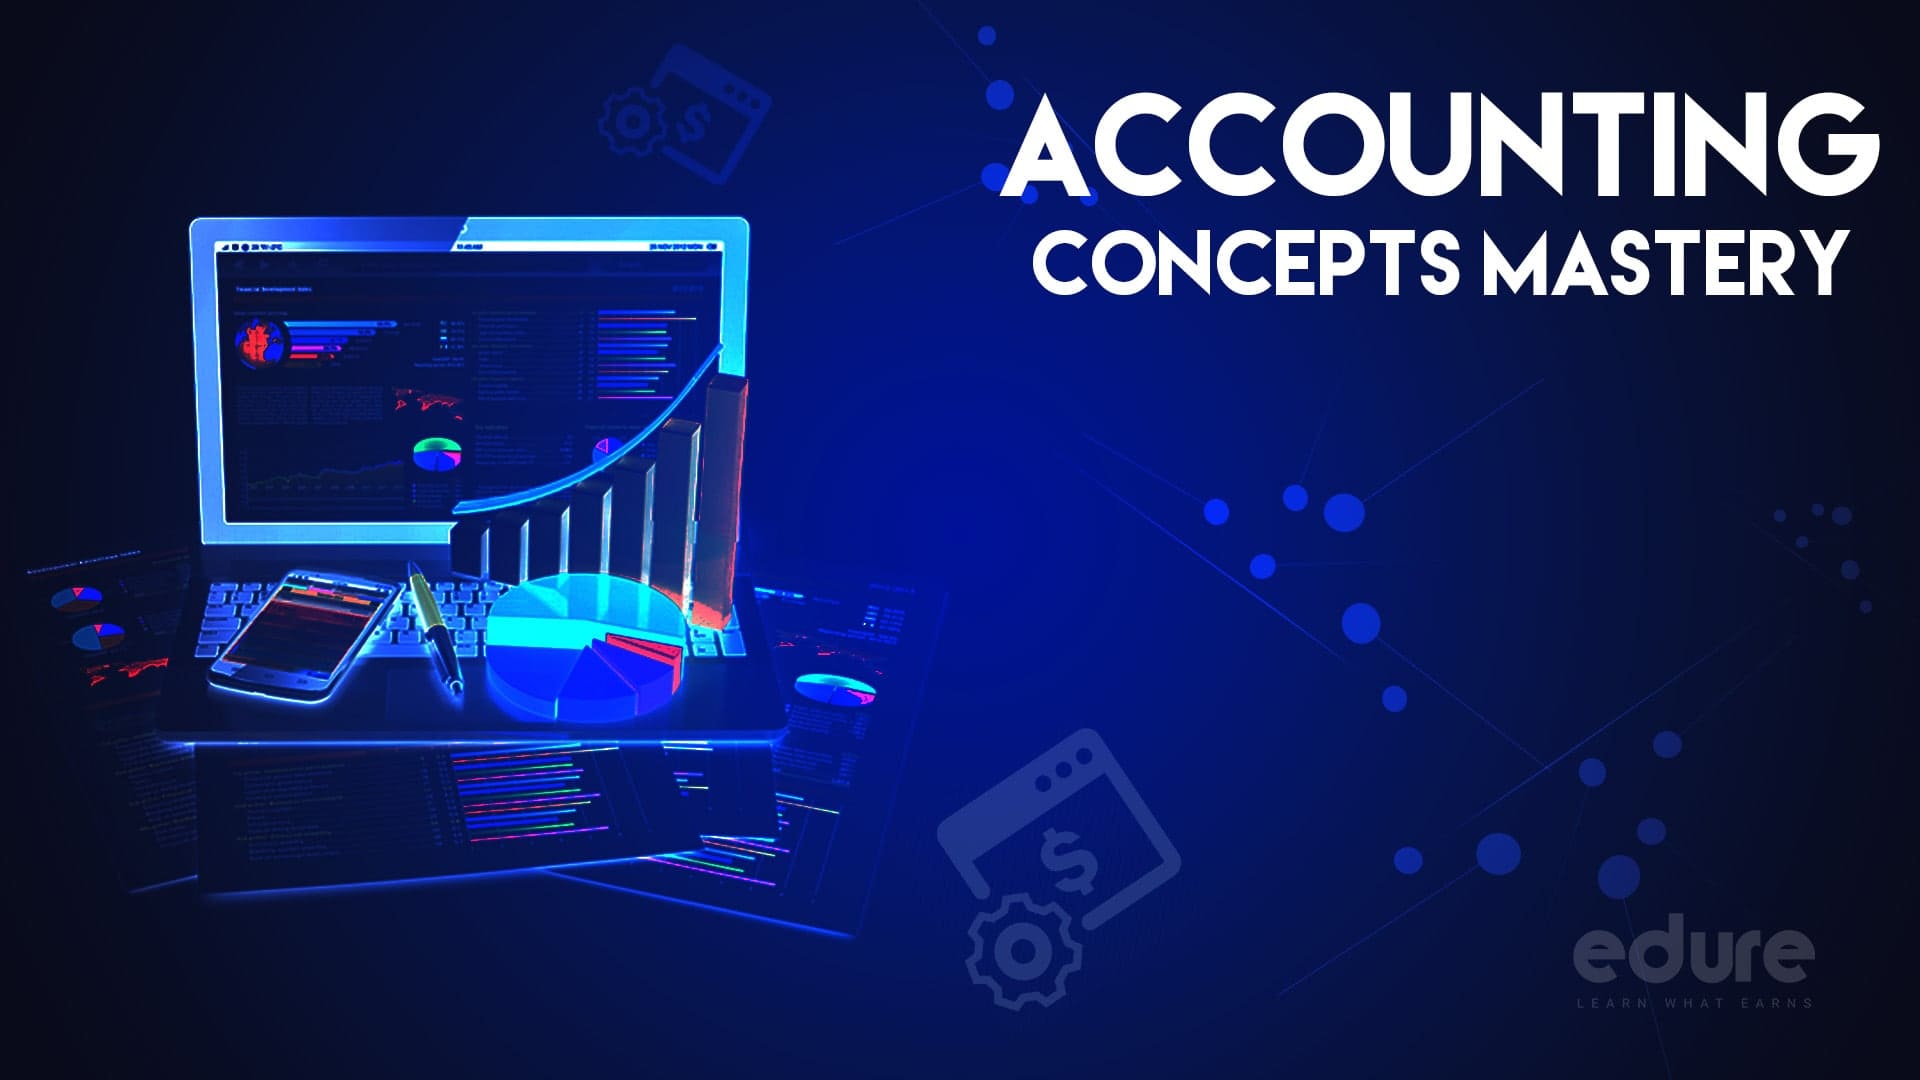 Accounting Concepts Mastery